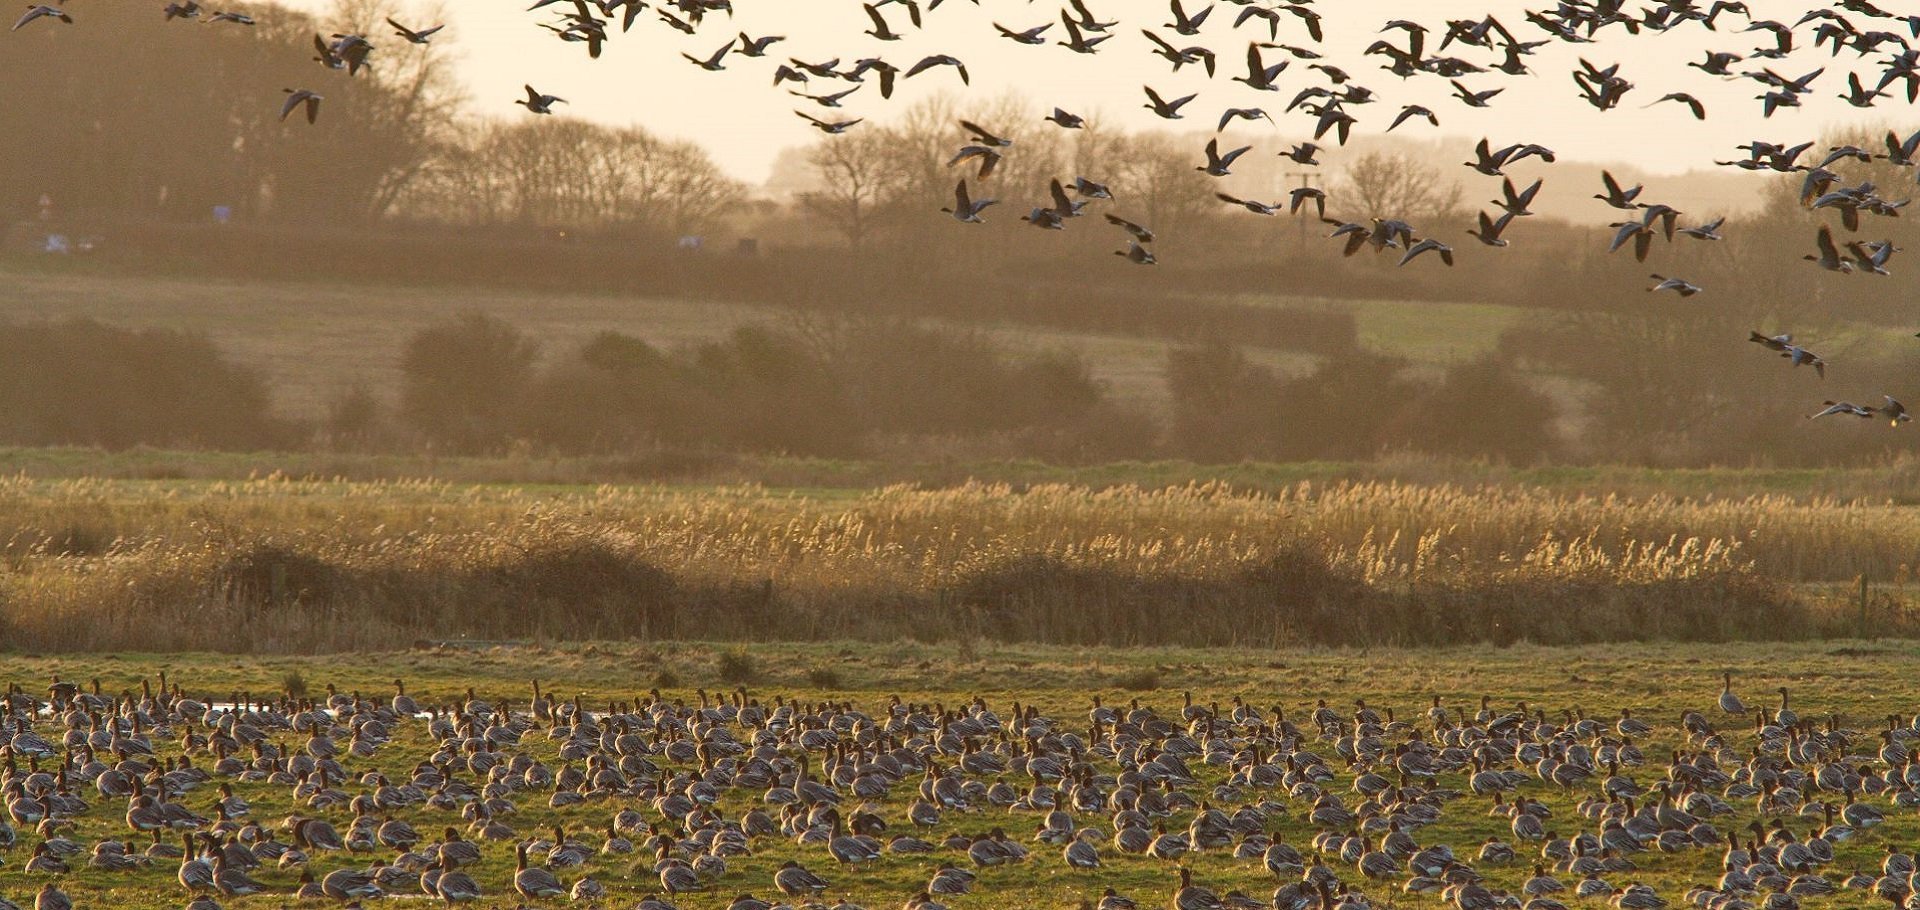 Pink footed geese are winter visitors to Dumfries and Galloway